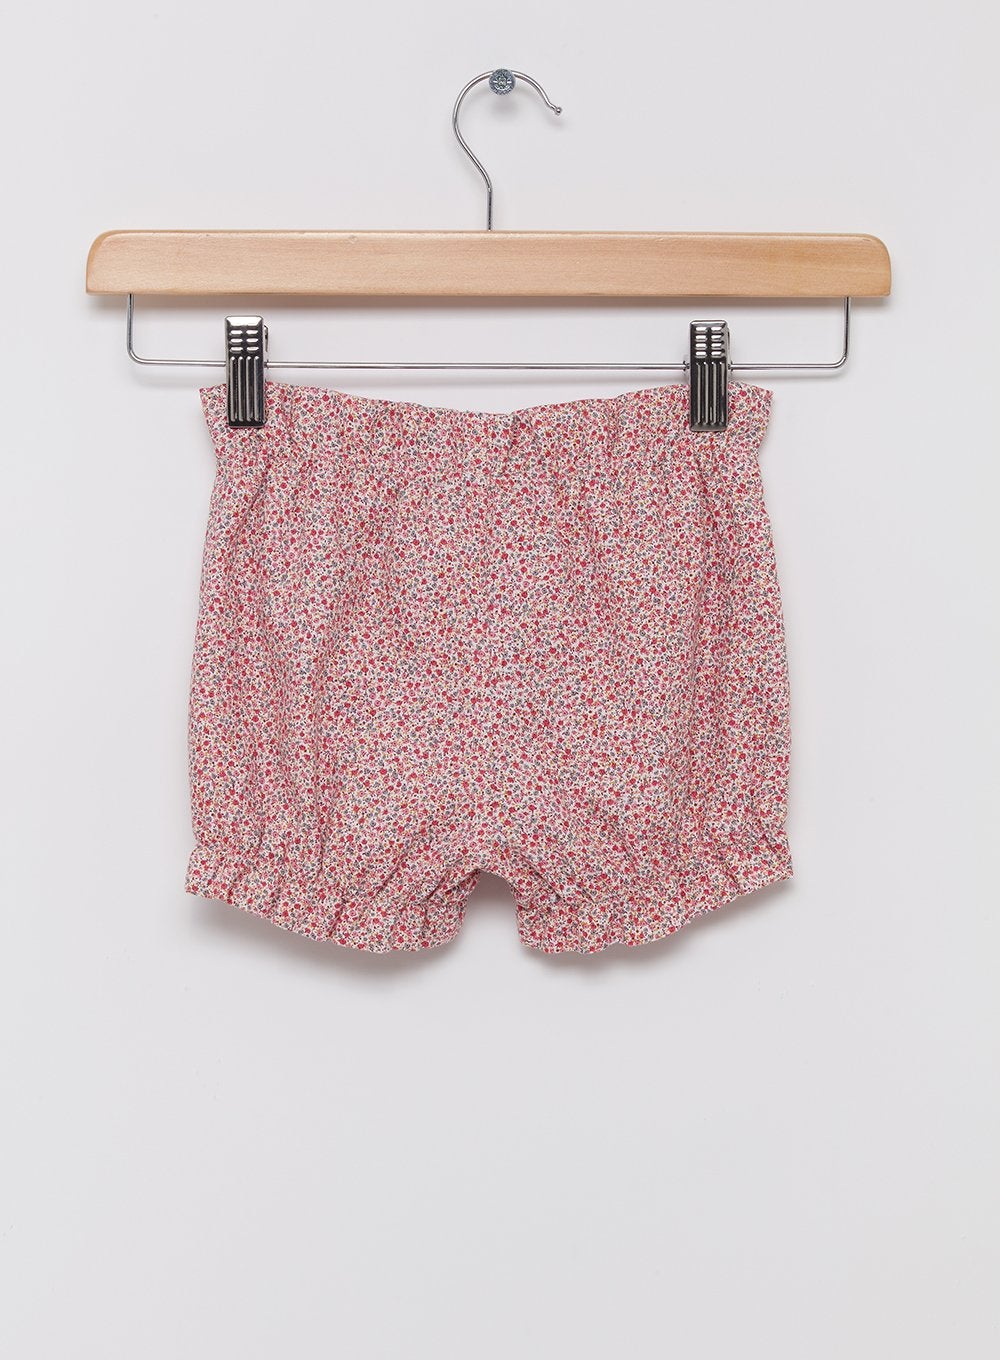 Confiture Bloomers Little Dotty Bloomers - Trotters Childrenswear